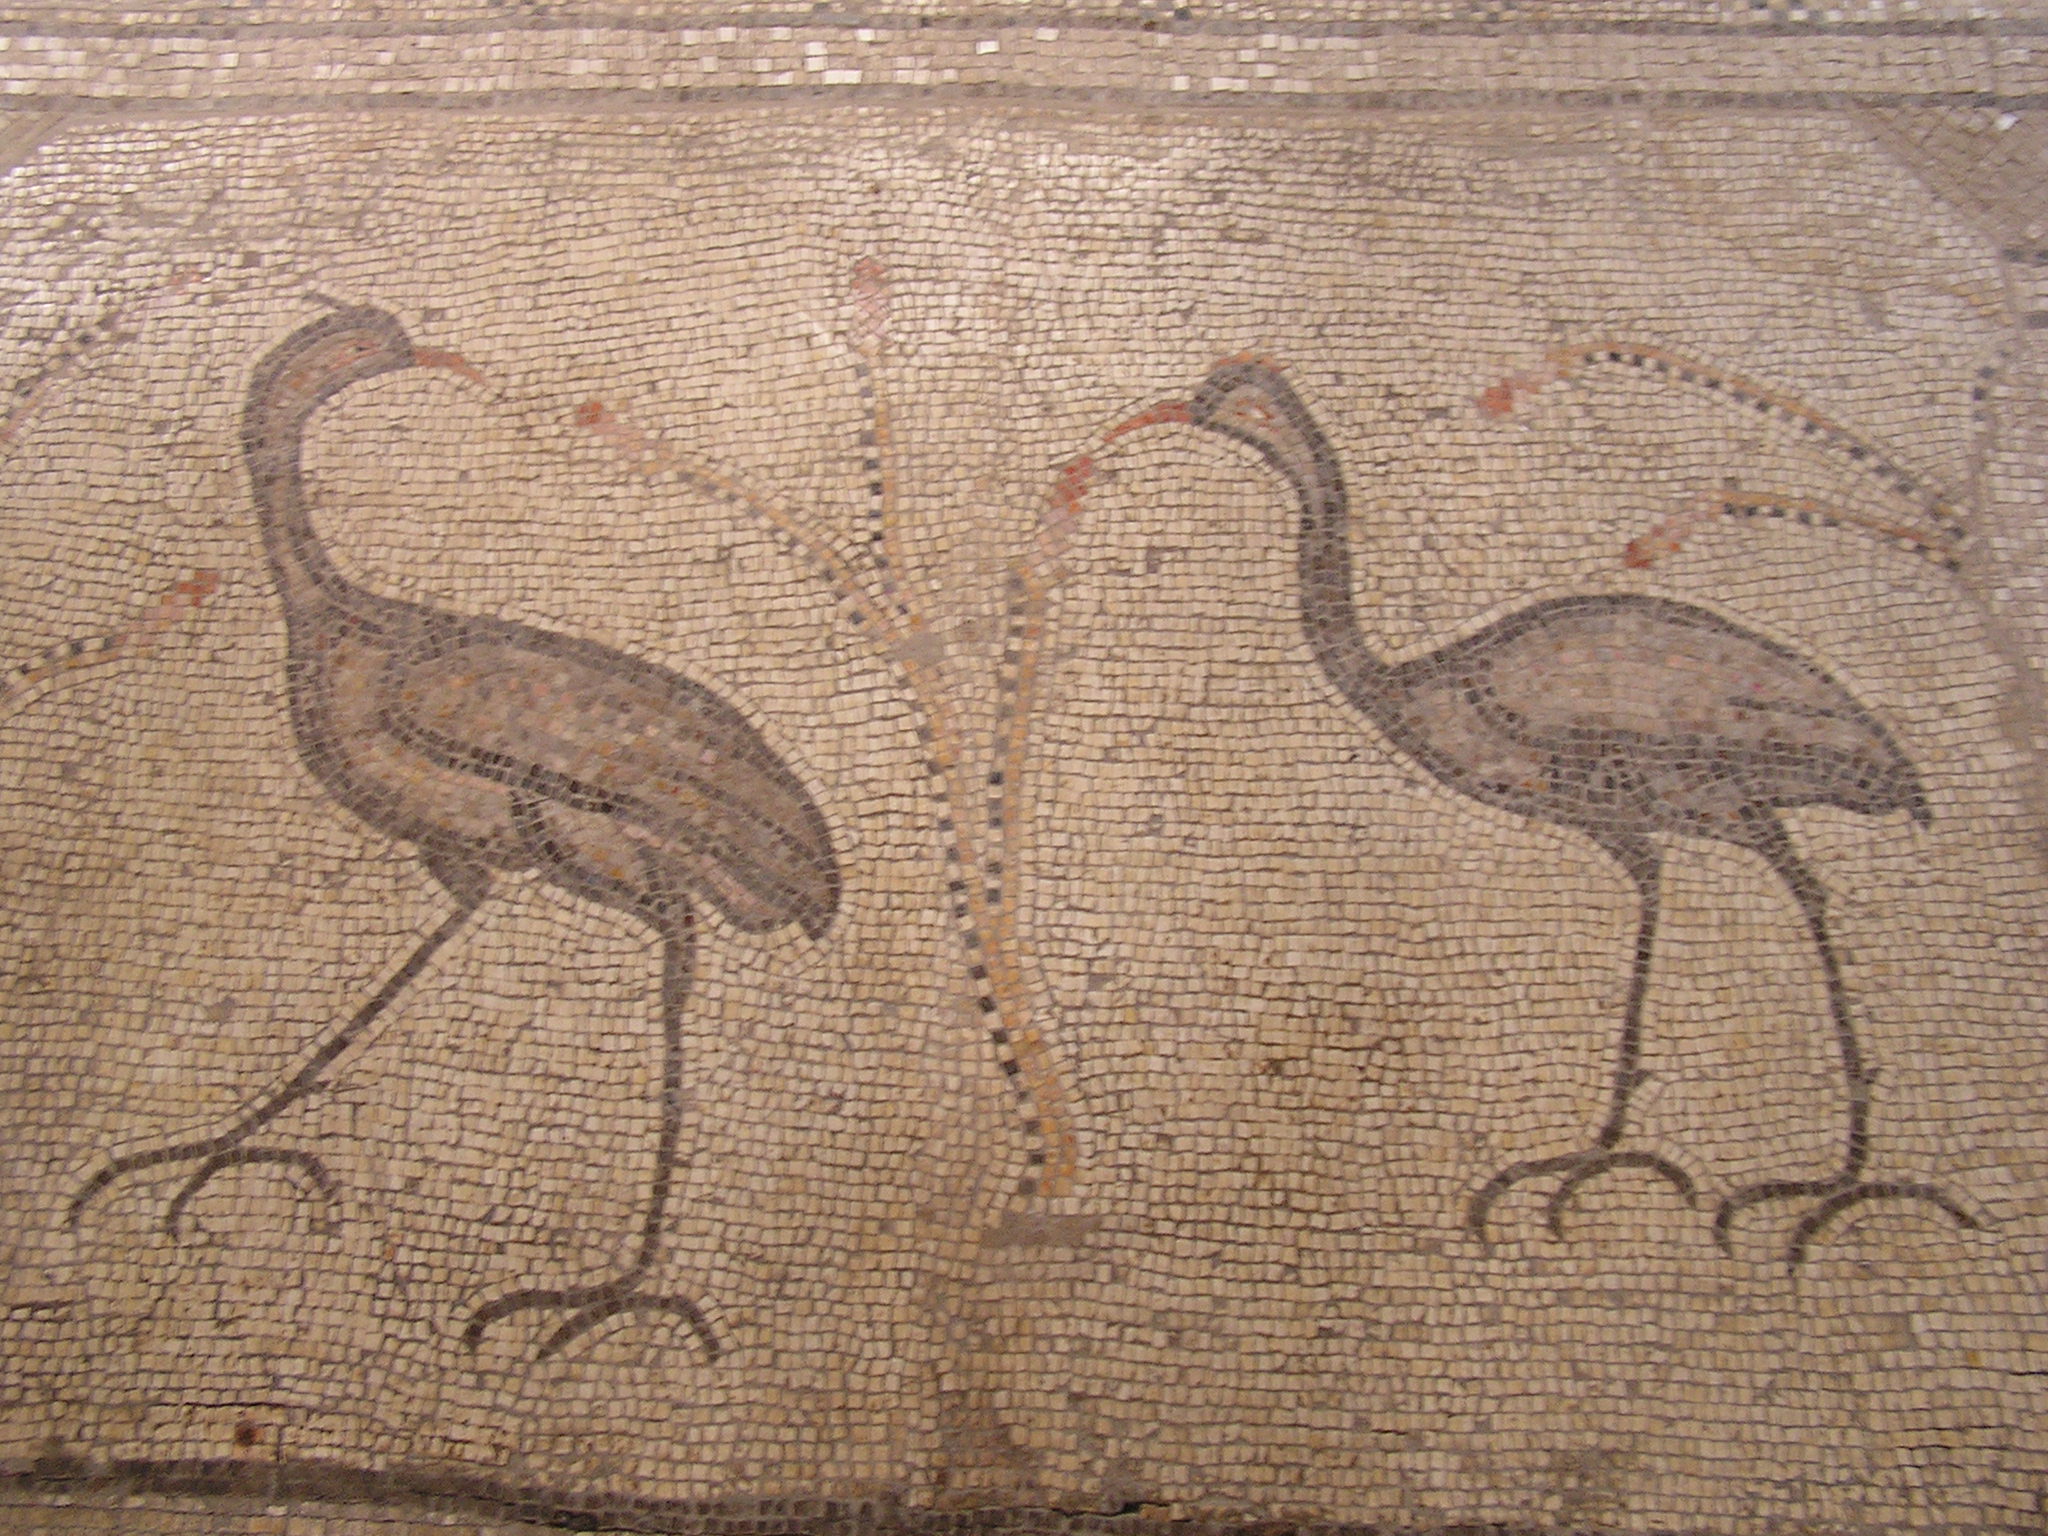 mosaic from 4th Century